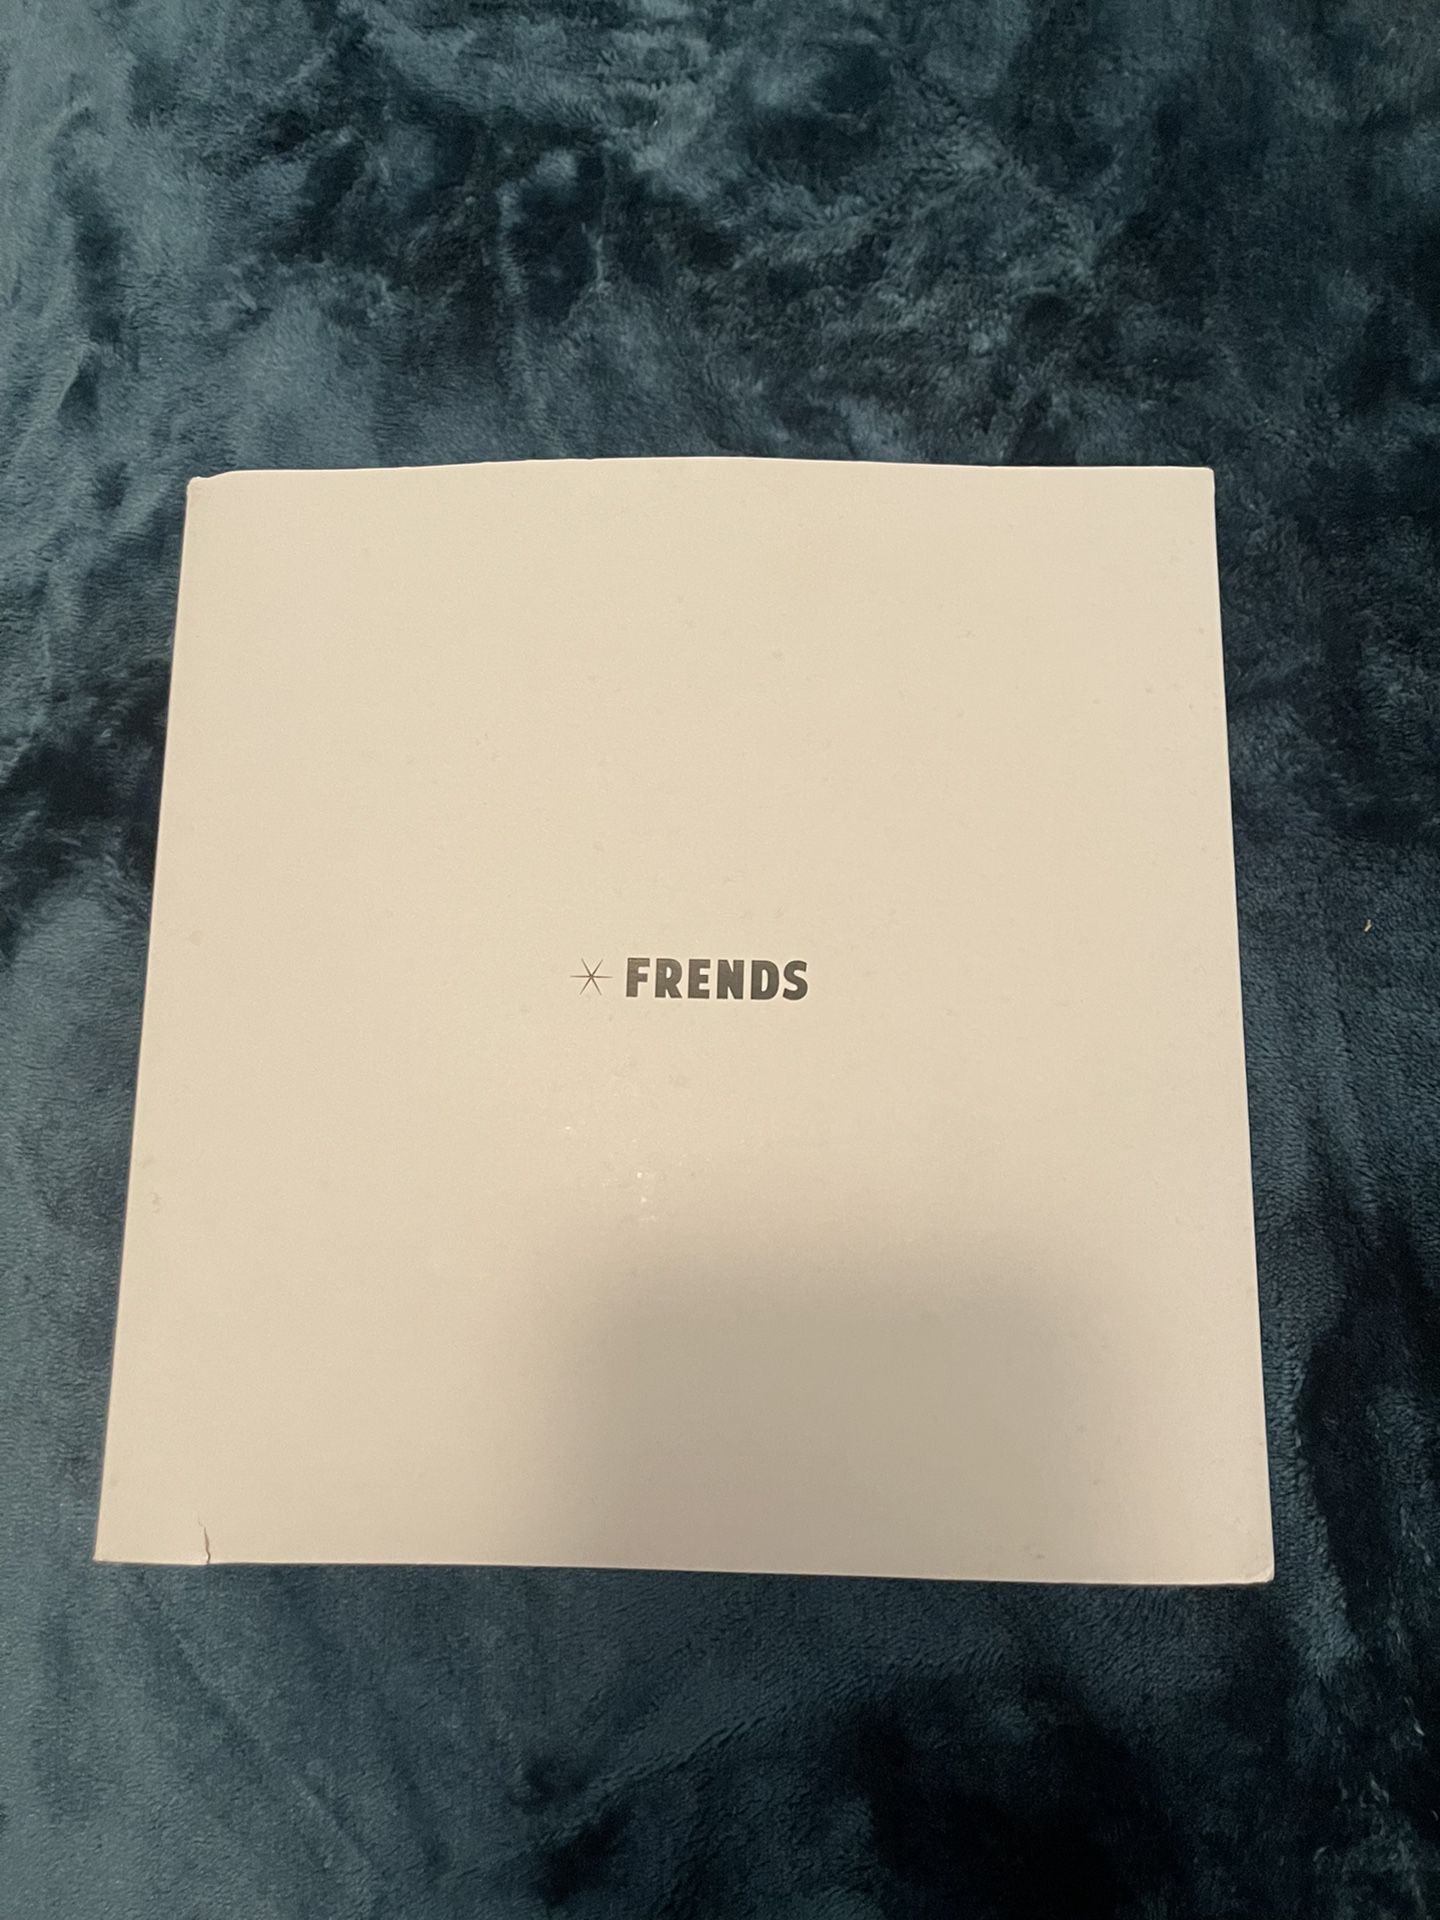 Frends Wireless Headphones (used Once) 